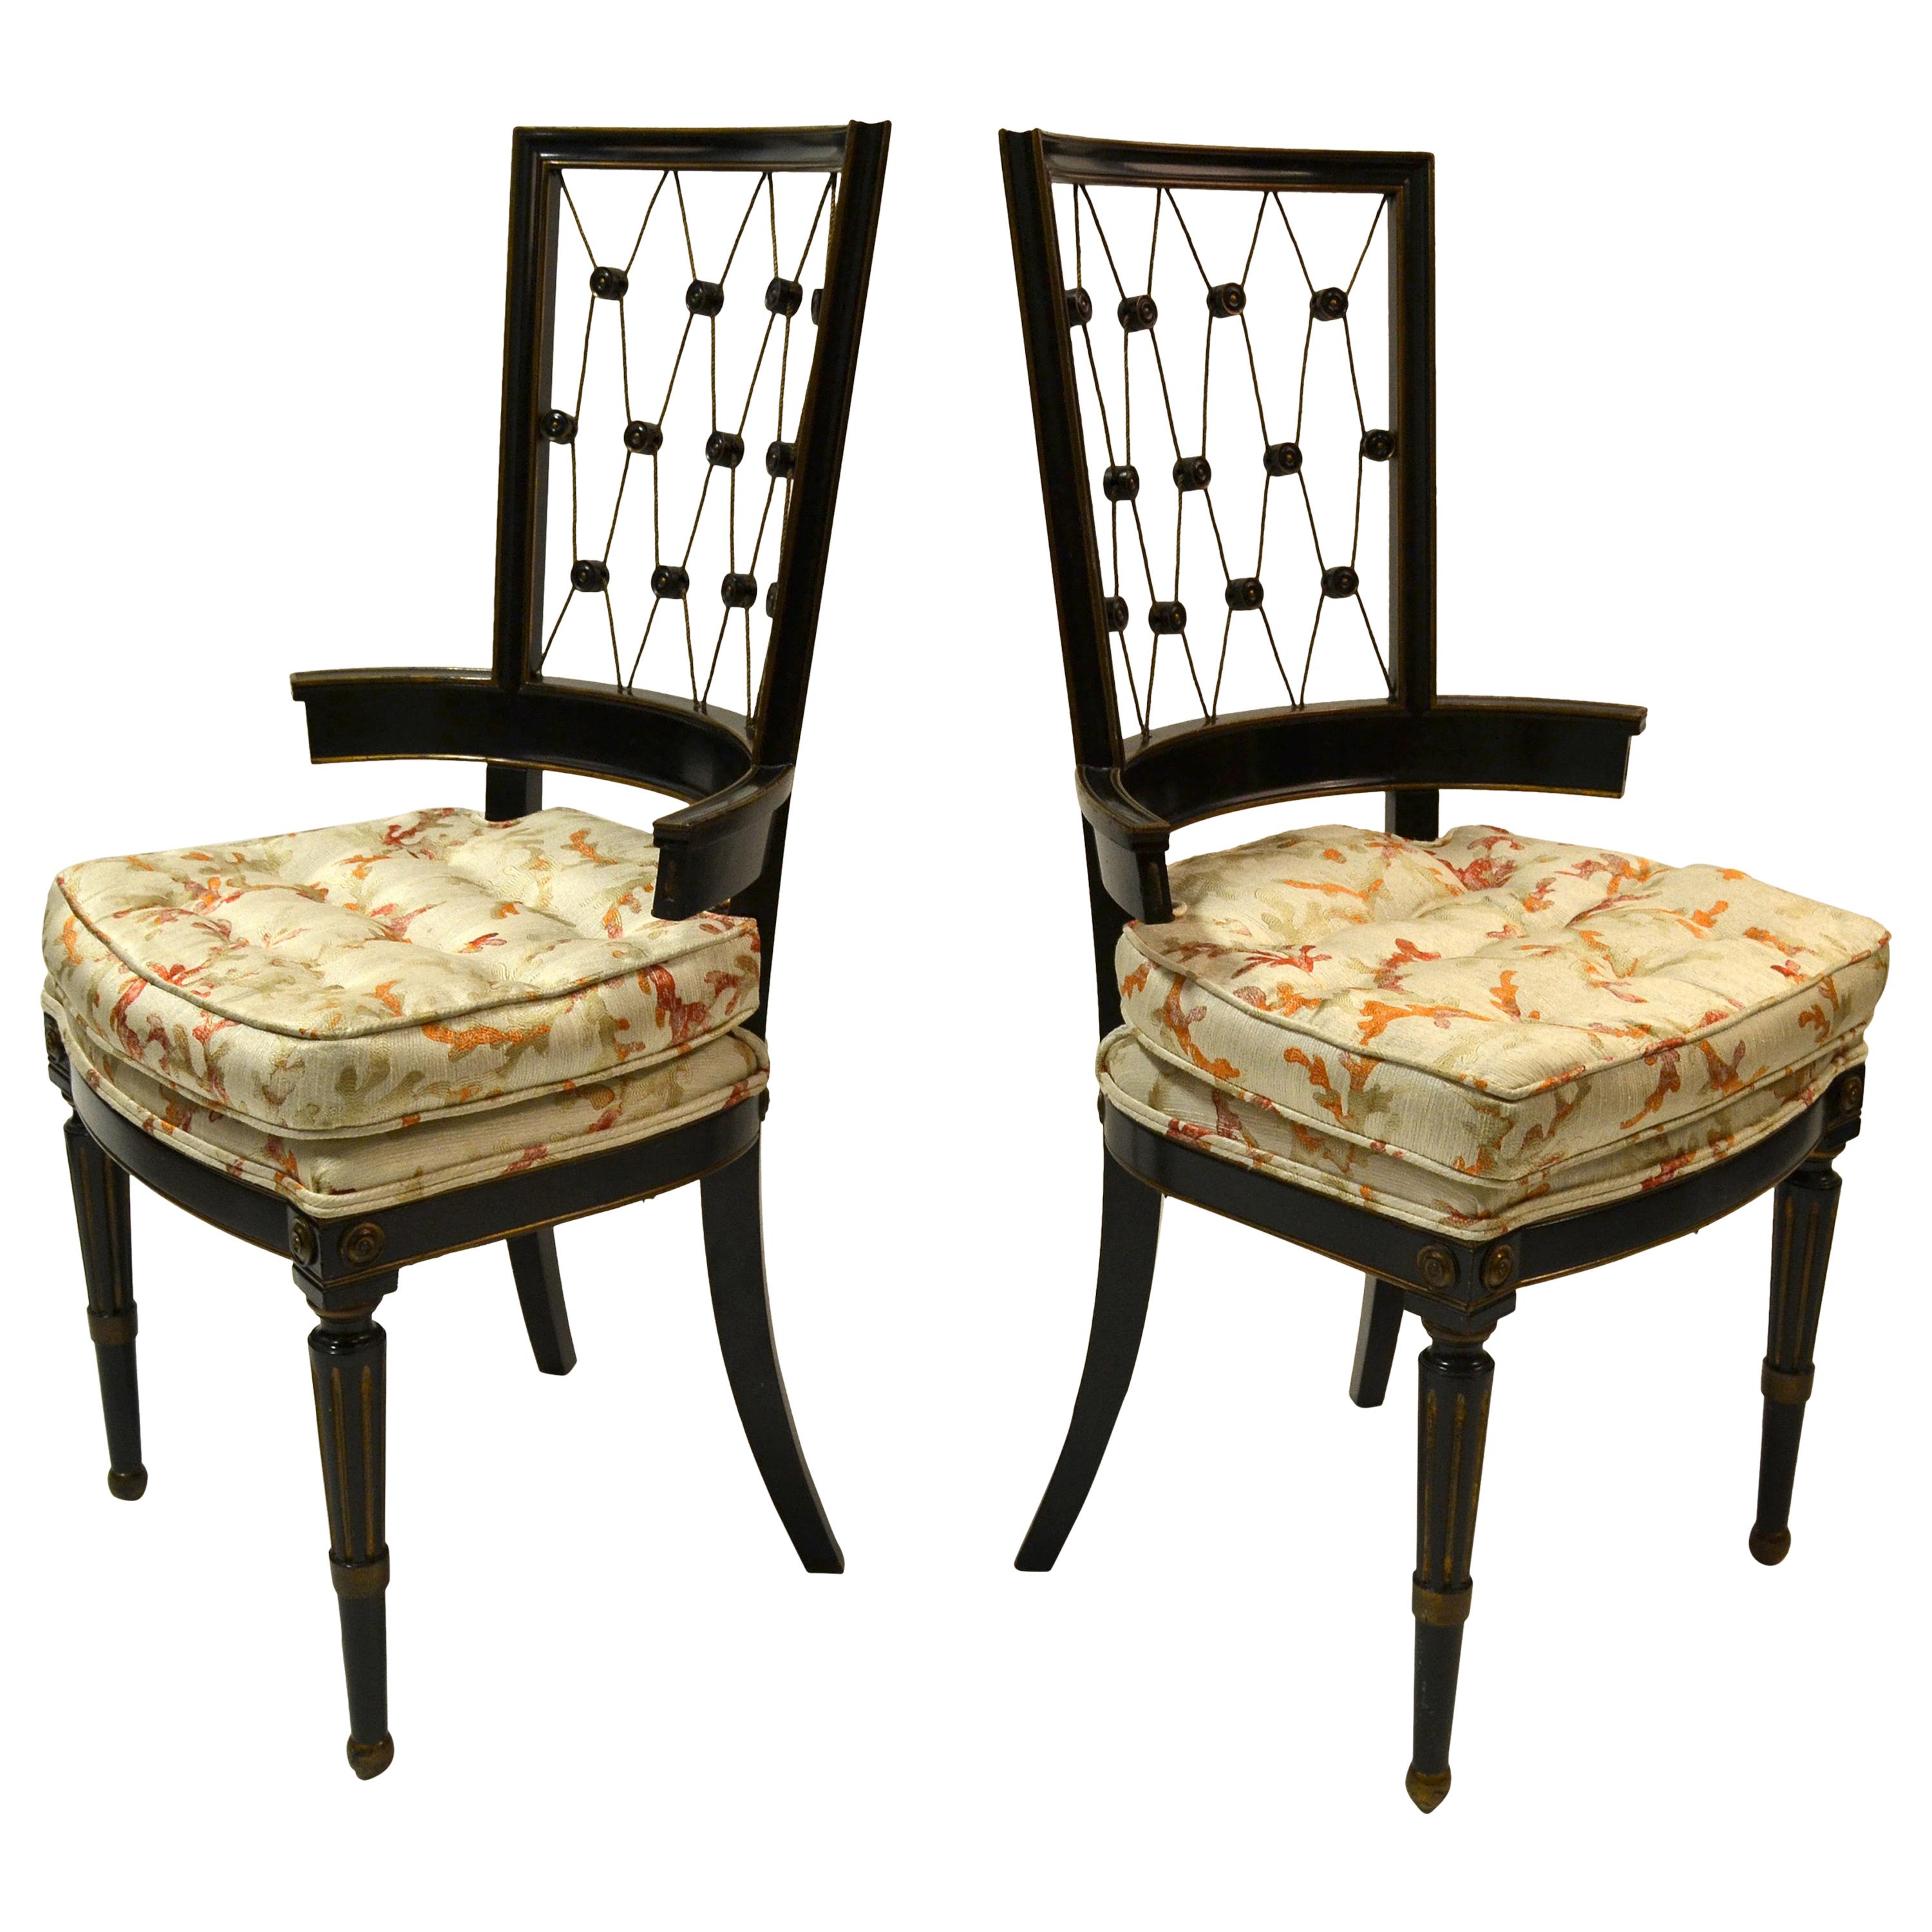 1940s American Side Chairs Intricate Diamond Pattern Back Black and Gold - Pair